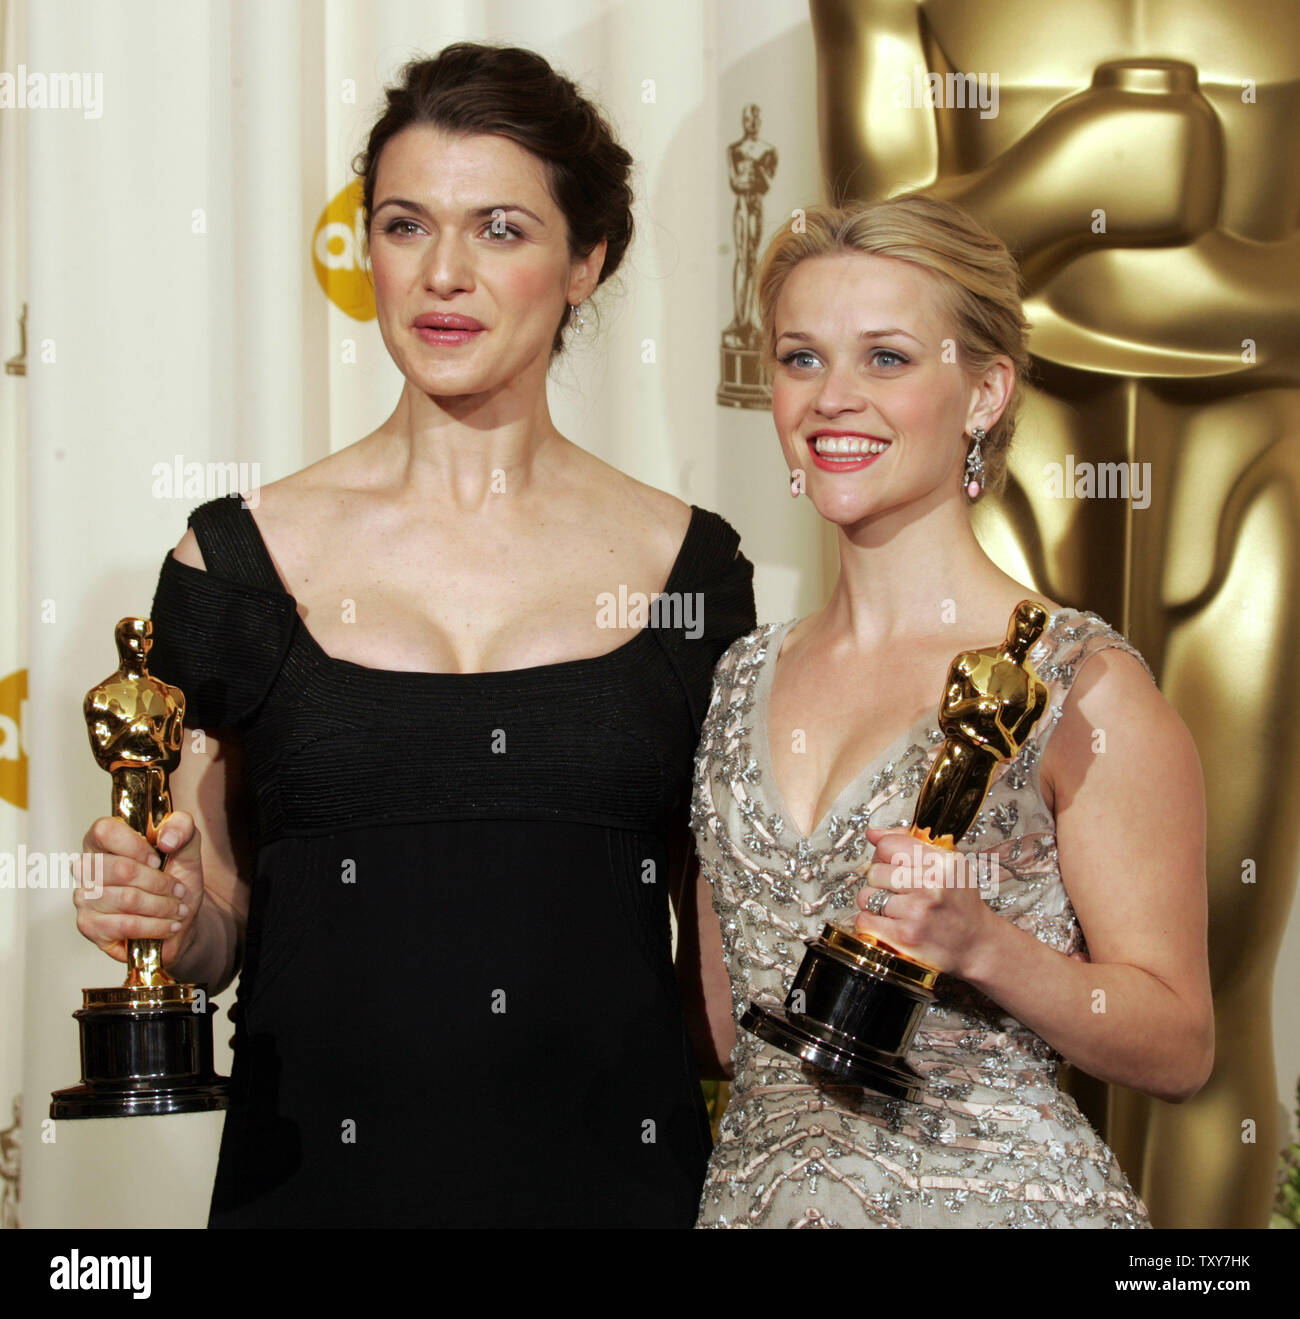 Reese Witherspoon (R) poses with her best actress Oscar for 'Walk the Line' along with Rachel Weisz and her Oscar for best supporting actress for 'Constant Gardener' at the 78th Annual Academy Awards at the Kodak Theatre in Hollywood, Ca., on March 5, 2006.   (UPI Photo/Gary C. Caskey) Stock Photo